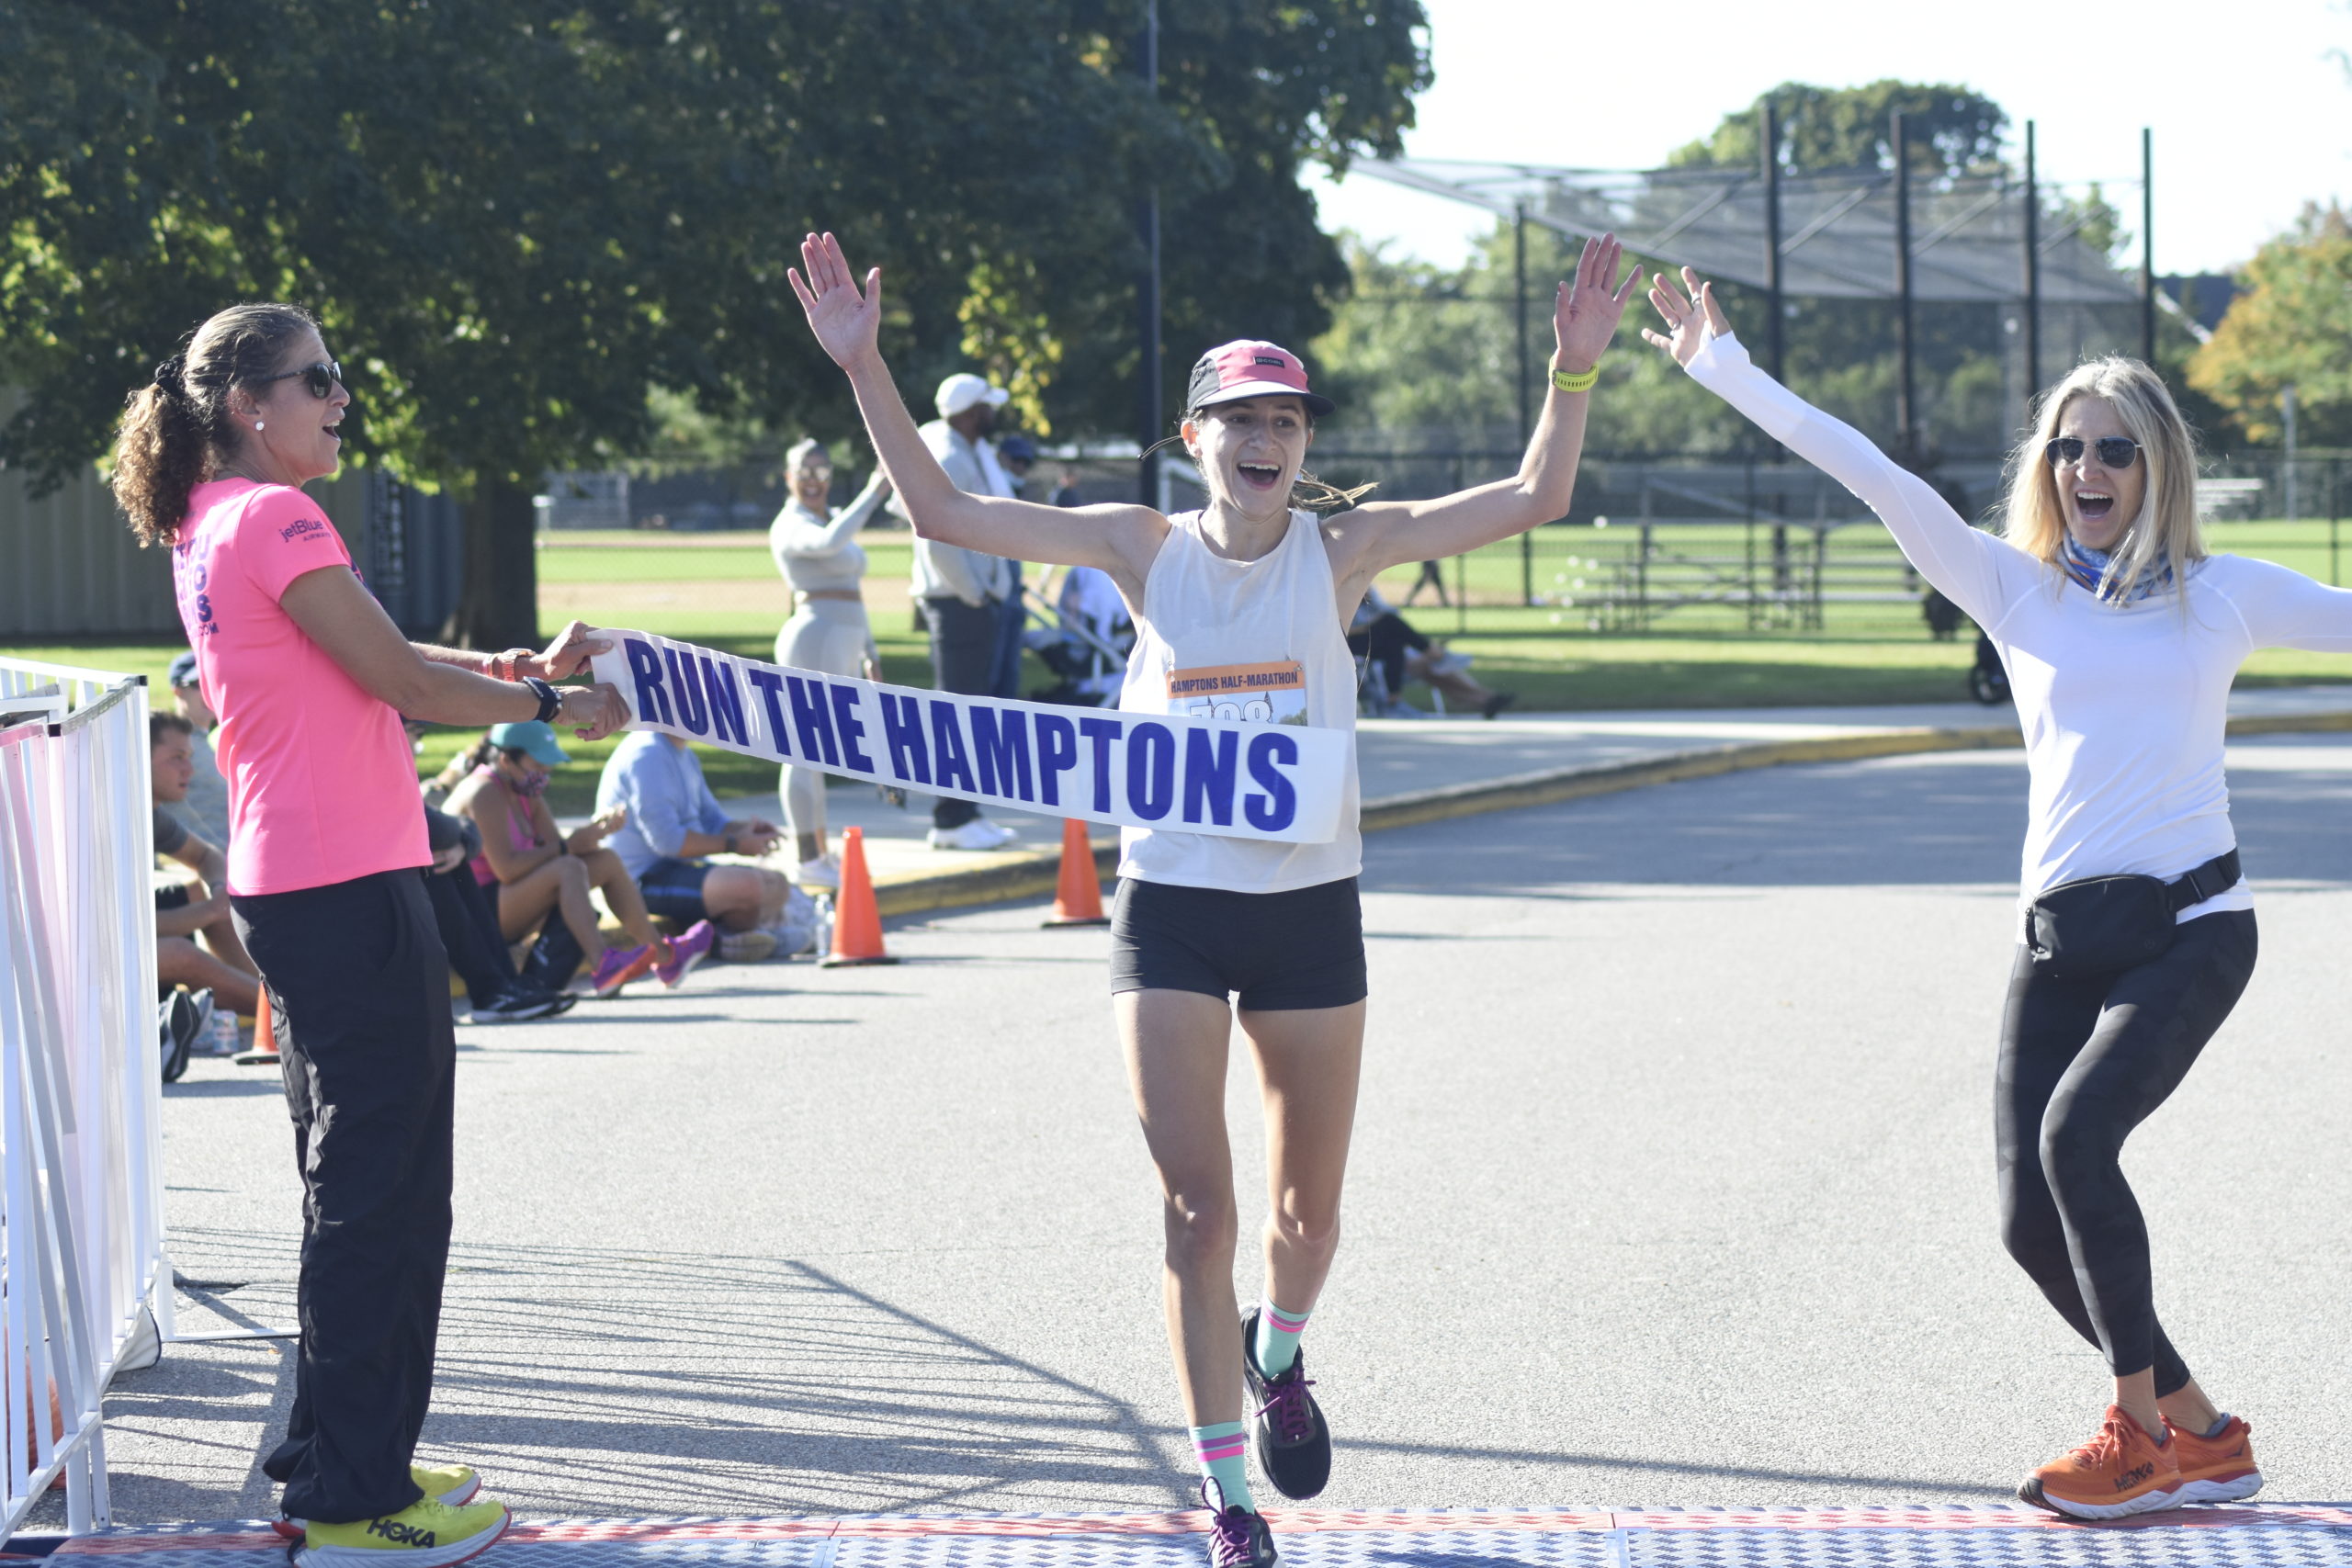 Katie Rominger of Brooklyn was the female champion of the Hamptons Half Marathon in Southampton on Saturday morning.